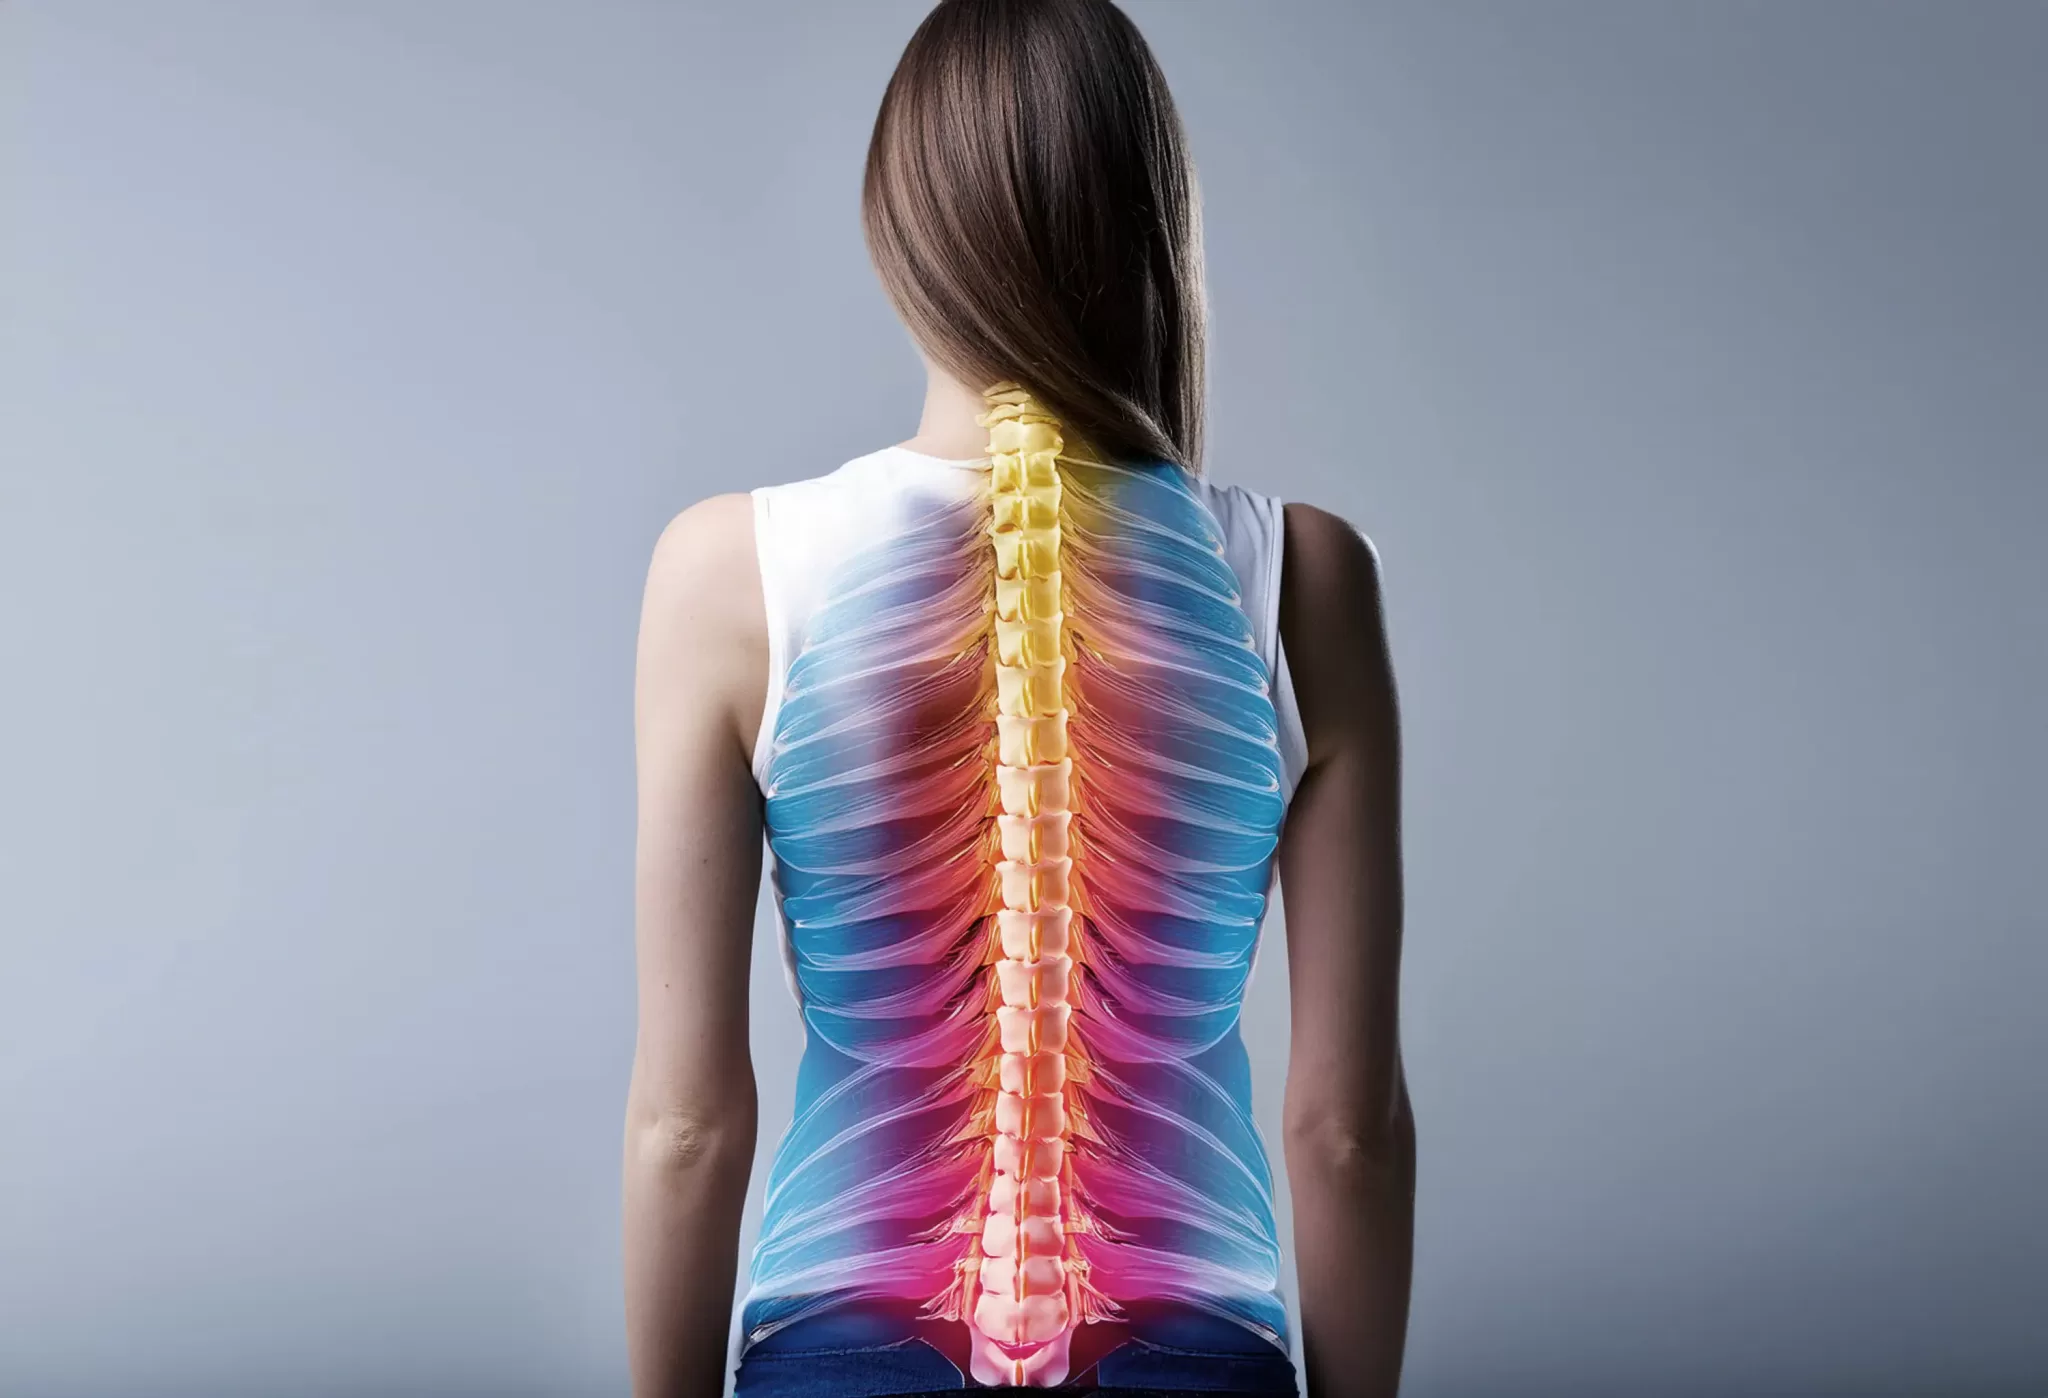 a woman's spine glows through her body